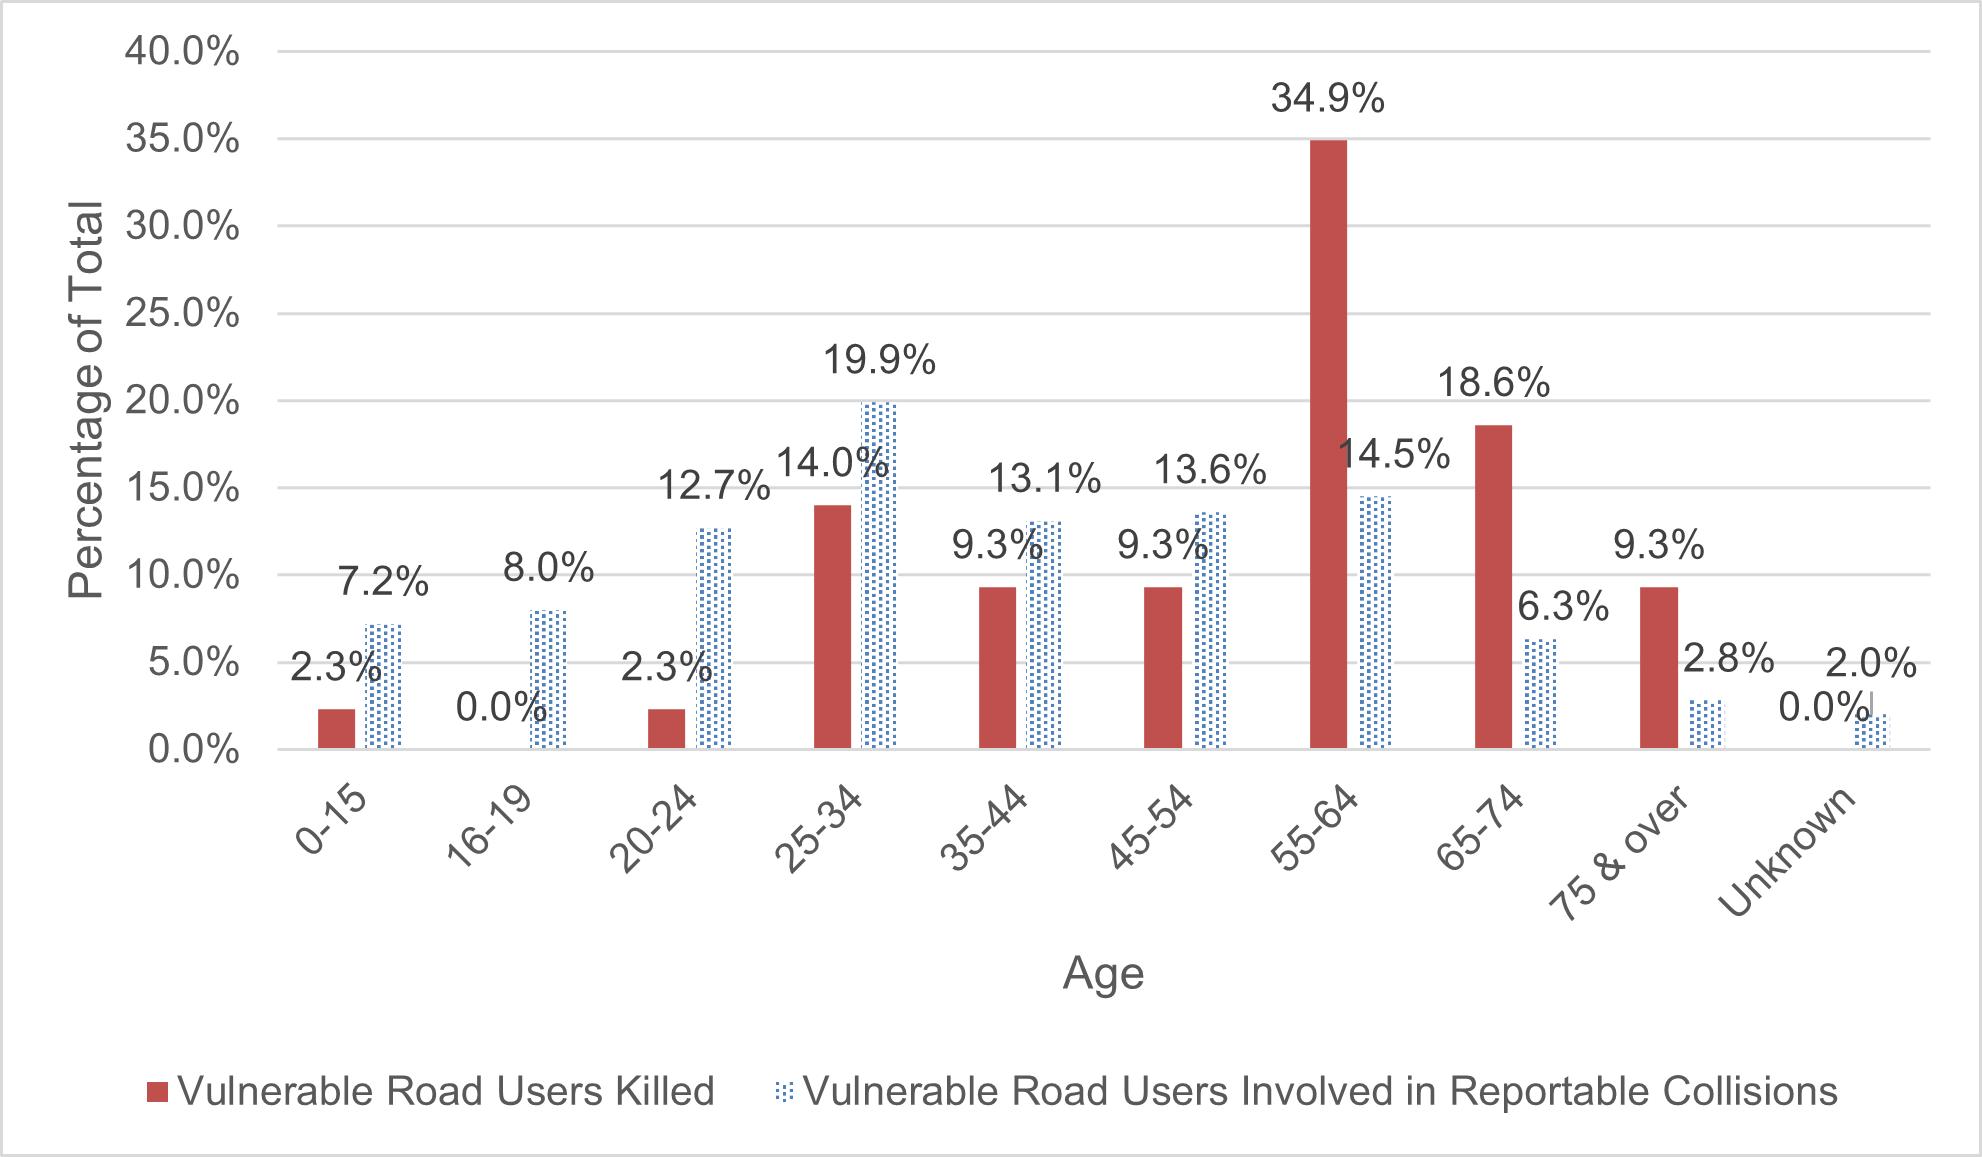 Figure 15 compares the number of vulnerable road users (motorcyclist, pedestrian, cyclist or e-bike rider) killed and the number of vulnerable road users (motorcyclist, pedestrian, cyclist or e-bike rider) involved in reportable collisions according to age category.